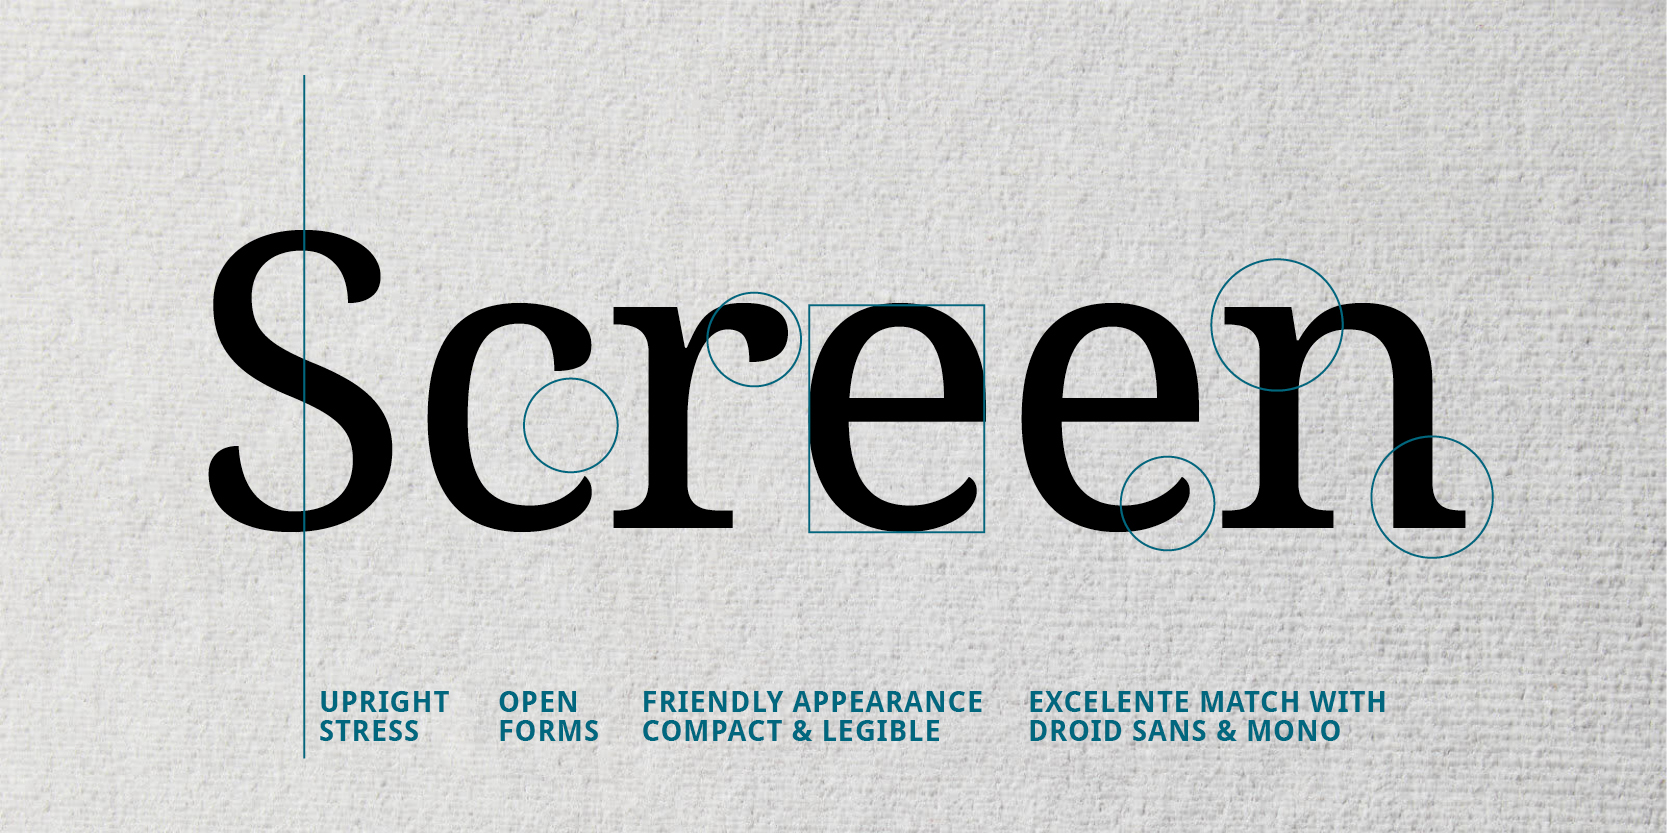 Card displaying Droid Serif typeface in various styles